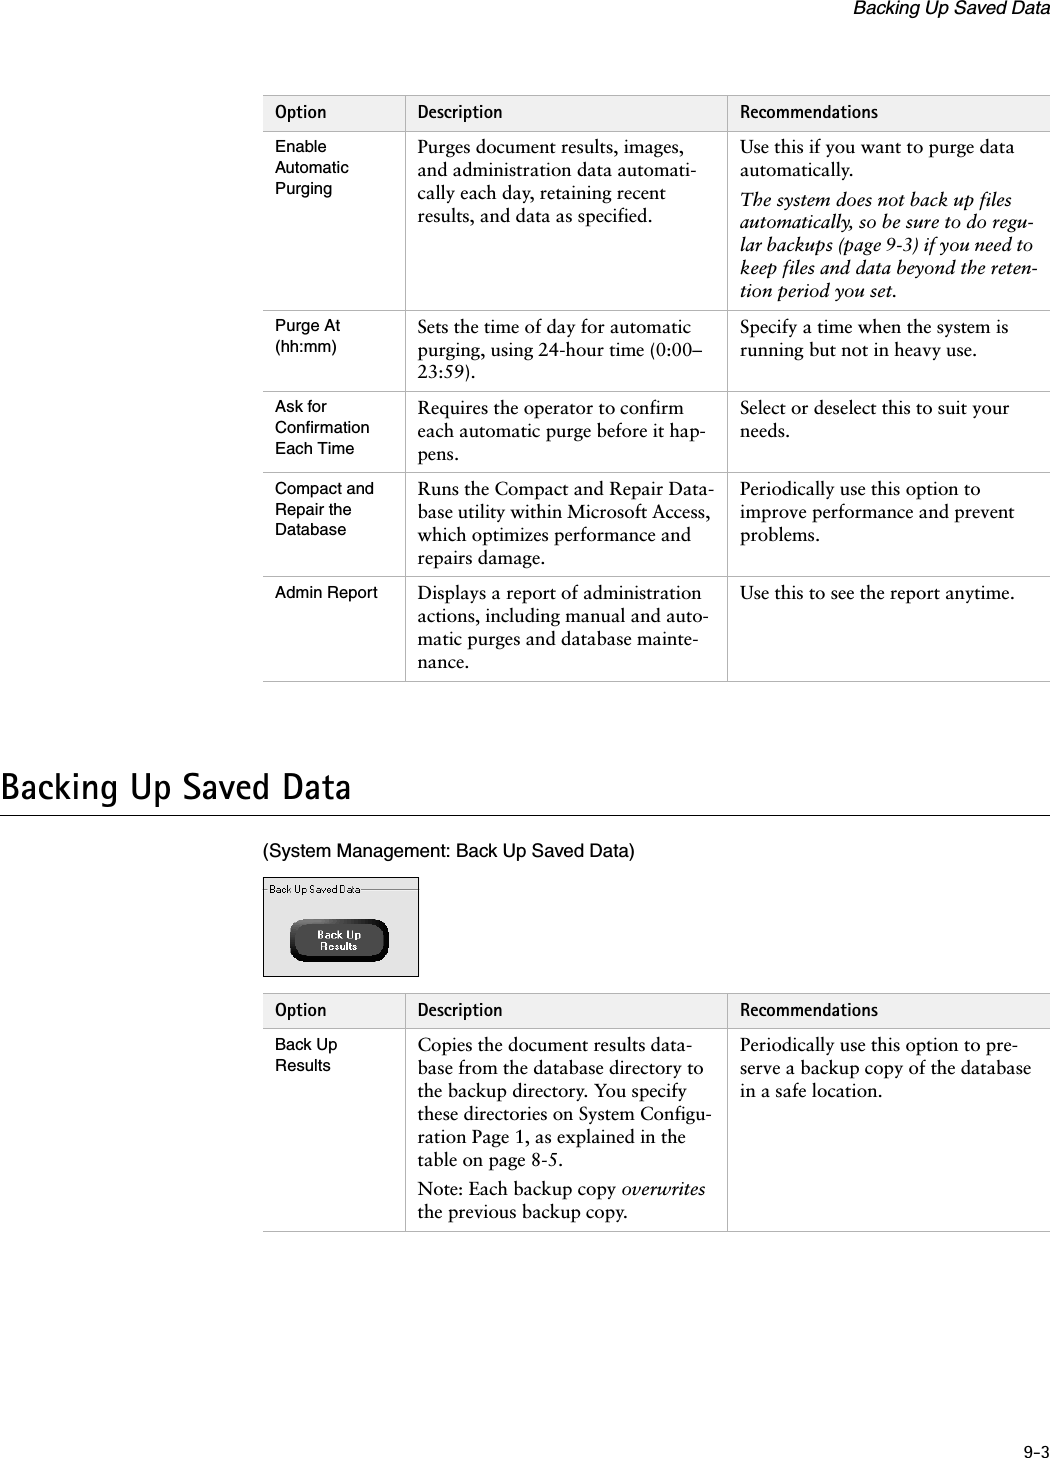 9-3Backing Up Saved DataBacking Up Saved Data(System Management: Back Up Saved Data)Enable Automatic PurgingPurges document results, images, and administration data automati-cally each day, retaining recent results, and data as specified. Use this if you want to purge data automatically.The system does not back up files automatically, so be sure to do regu-lar backups (page 9-3) if you need to keep files and data beyond the reten-tion period you set.Purge At (hh:mm)Sets the time of day for automatic purging, using 24-hour time (0:00–23:59).Specify a time when the system is running but not in heavy use.Ask for Confirmation Each TimeRequires the operator to confirm each automatic purge before it hap-pens.Select or deselect this to suit your needs.Compact and Repair the DatabaseRuns the Compact and Repair Data-base utility within Microsoft Access, which optimizes performance and repairs damage.Periodically use this option to improve performance and prevent problems.Admin Report Displays a report of administration actions, including manual and auto-matic purges and database mainte-nance.Use this to see the report anytime.Option Description RecommendationsOption Description RecommendationsBack Up ResultsCopies the document results data-base from the database directory to the backup directory. You specify these directories on System Configu-ration Page 1, as explained in the table on page 8-5.Note: Each backup copy overwrites the previous backup copy.Periodically use this option to pre-serve a backup copy of the database in a safe location.